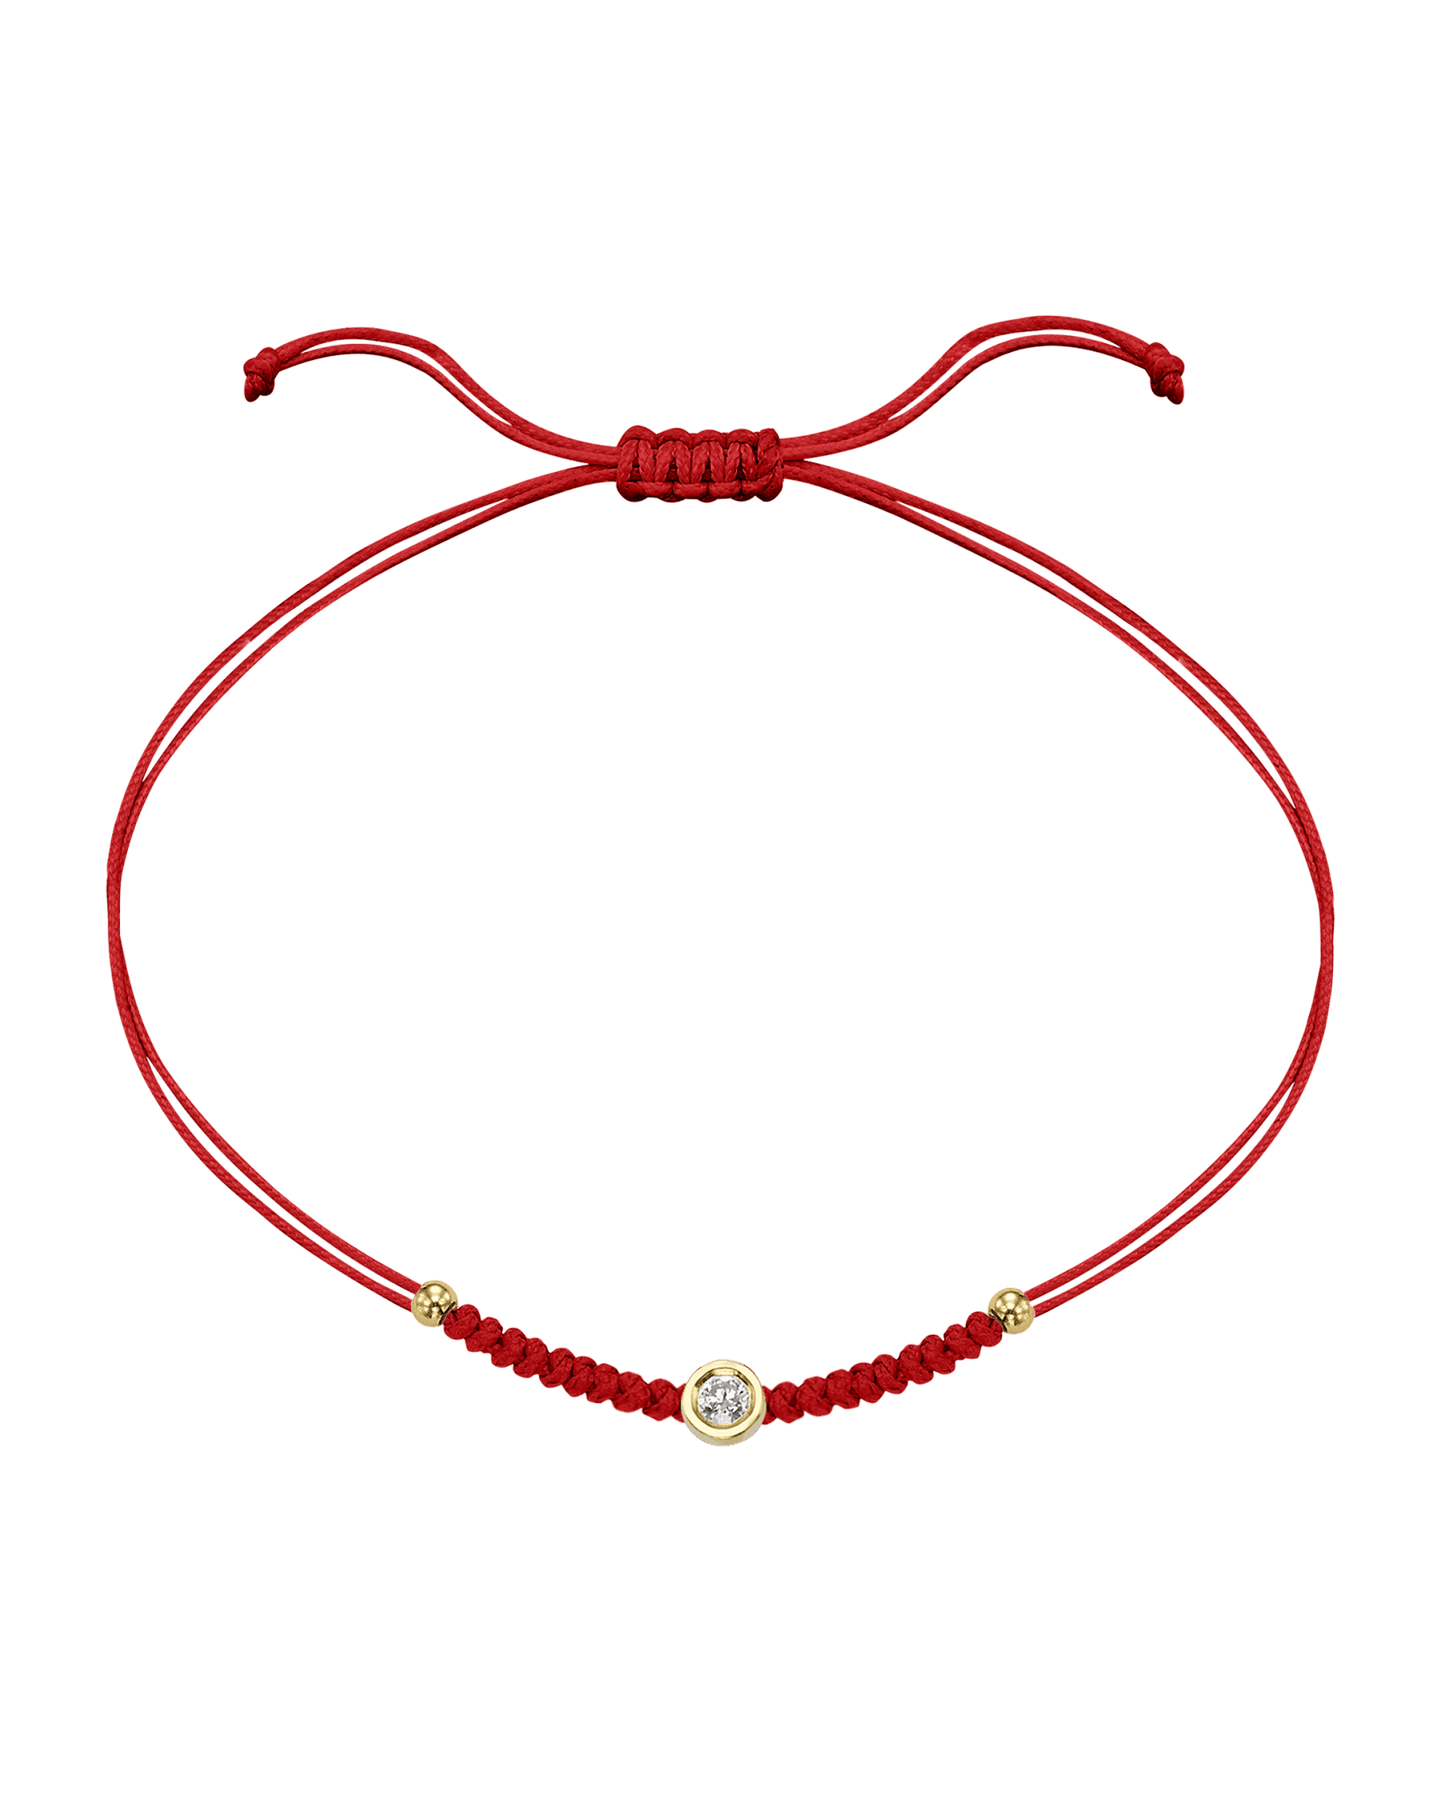 Solid Gold Sphere String of Love - 14K Yellow Gold Bracelet 14K Solid Gold Red Medium: 0.04ct 